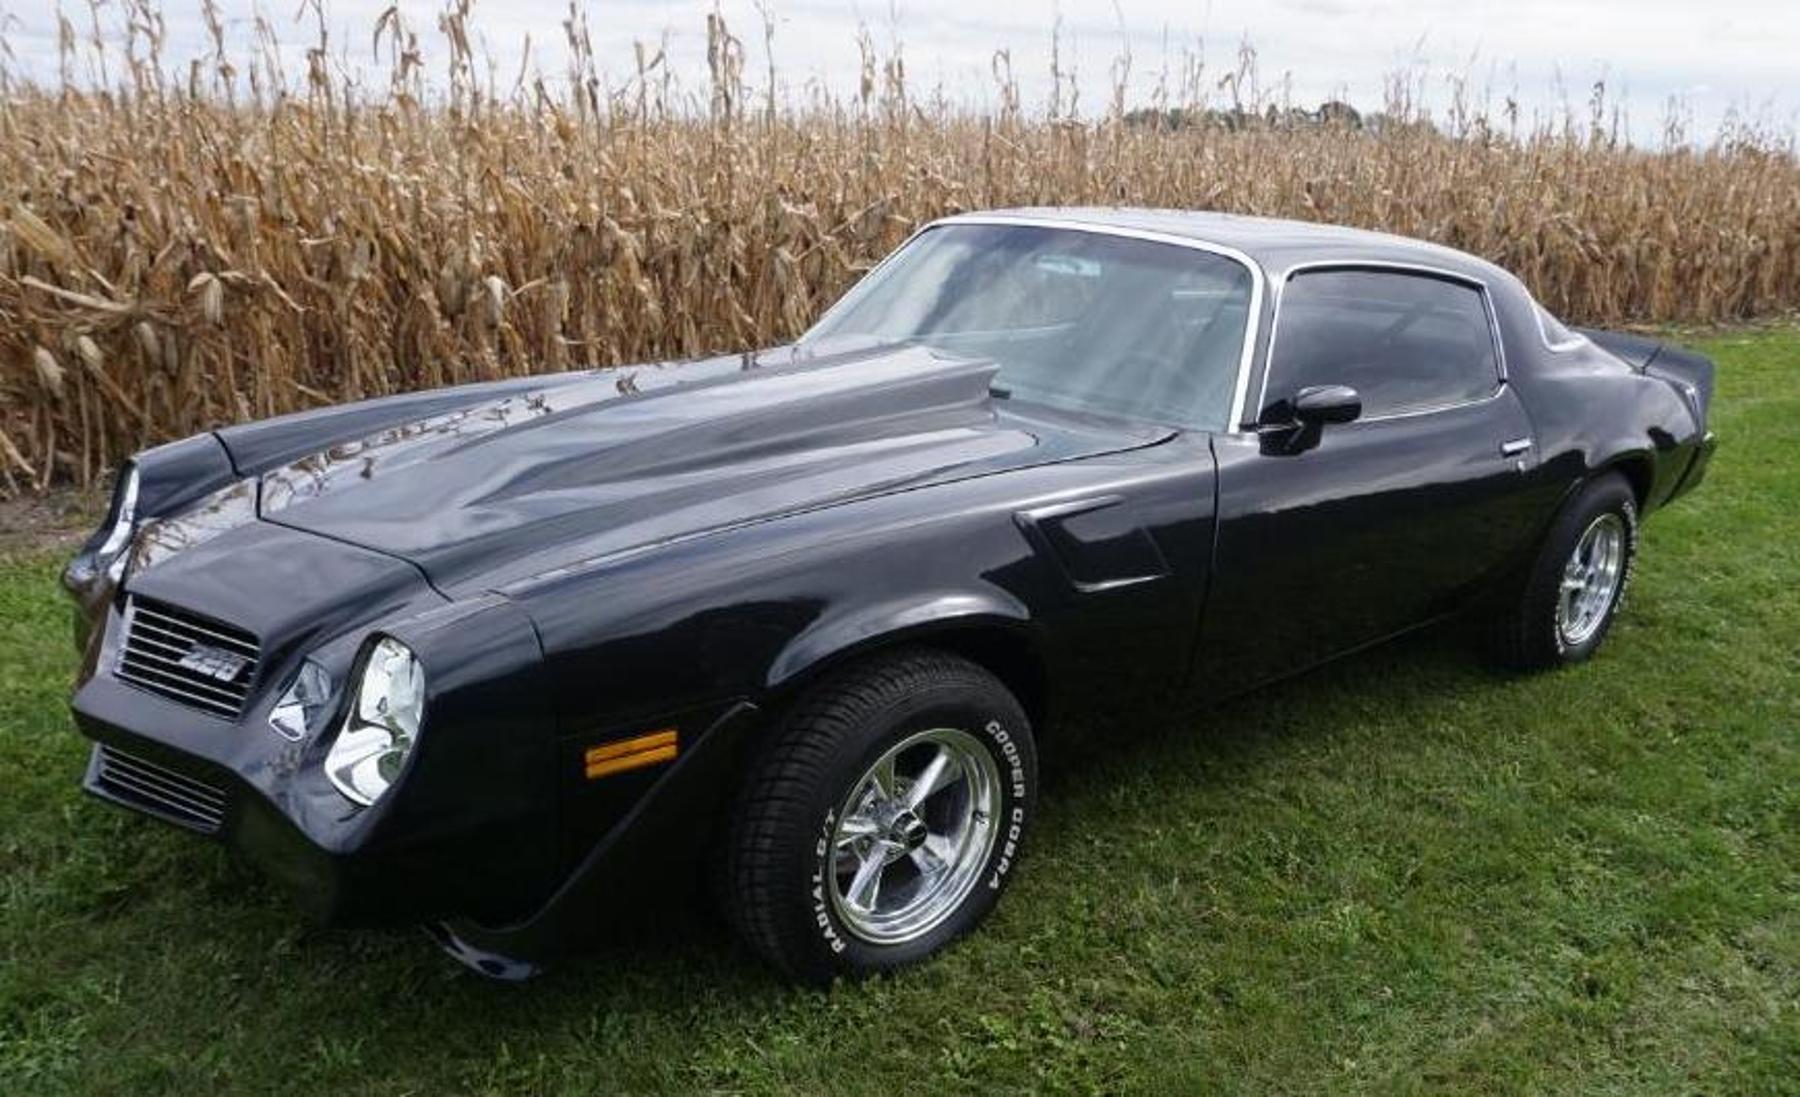 1981 Camaro Z28, 4-Wheelers, Stainless Steel Tanker, Allis-Chalmers Parts & More